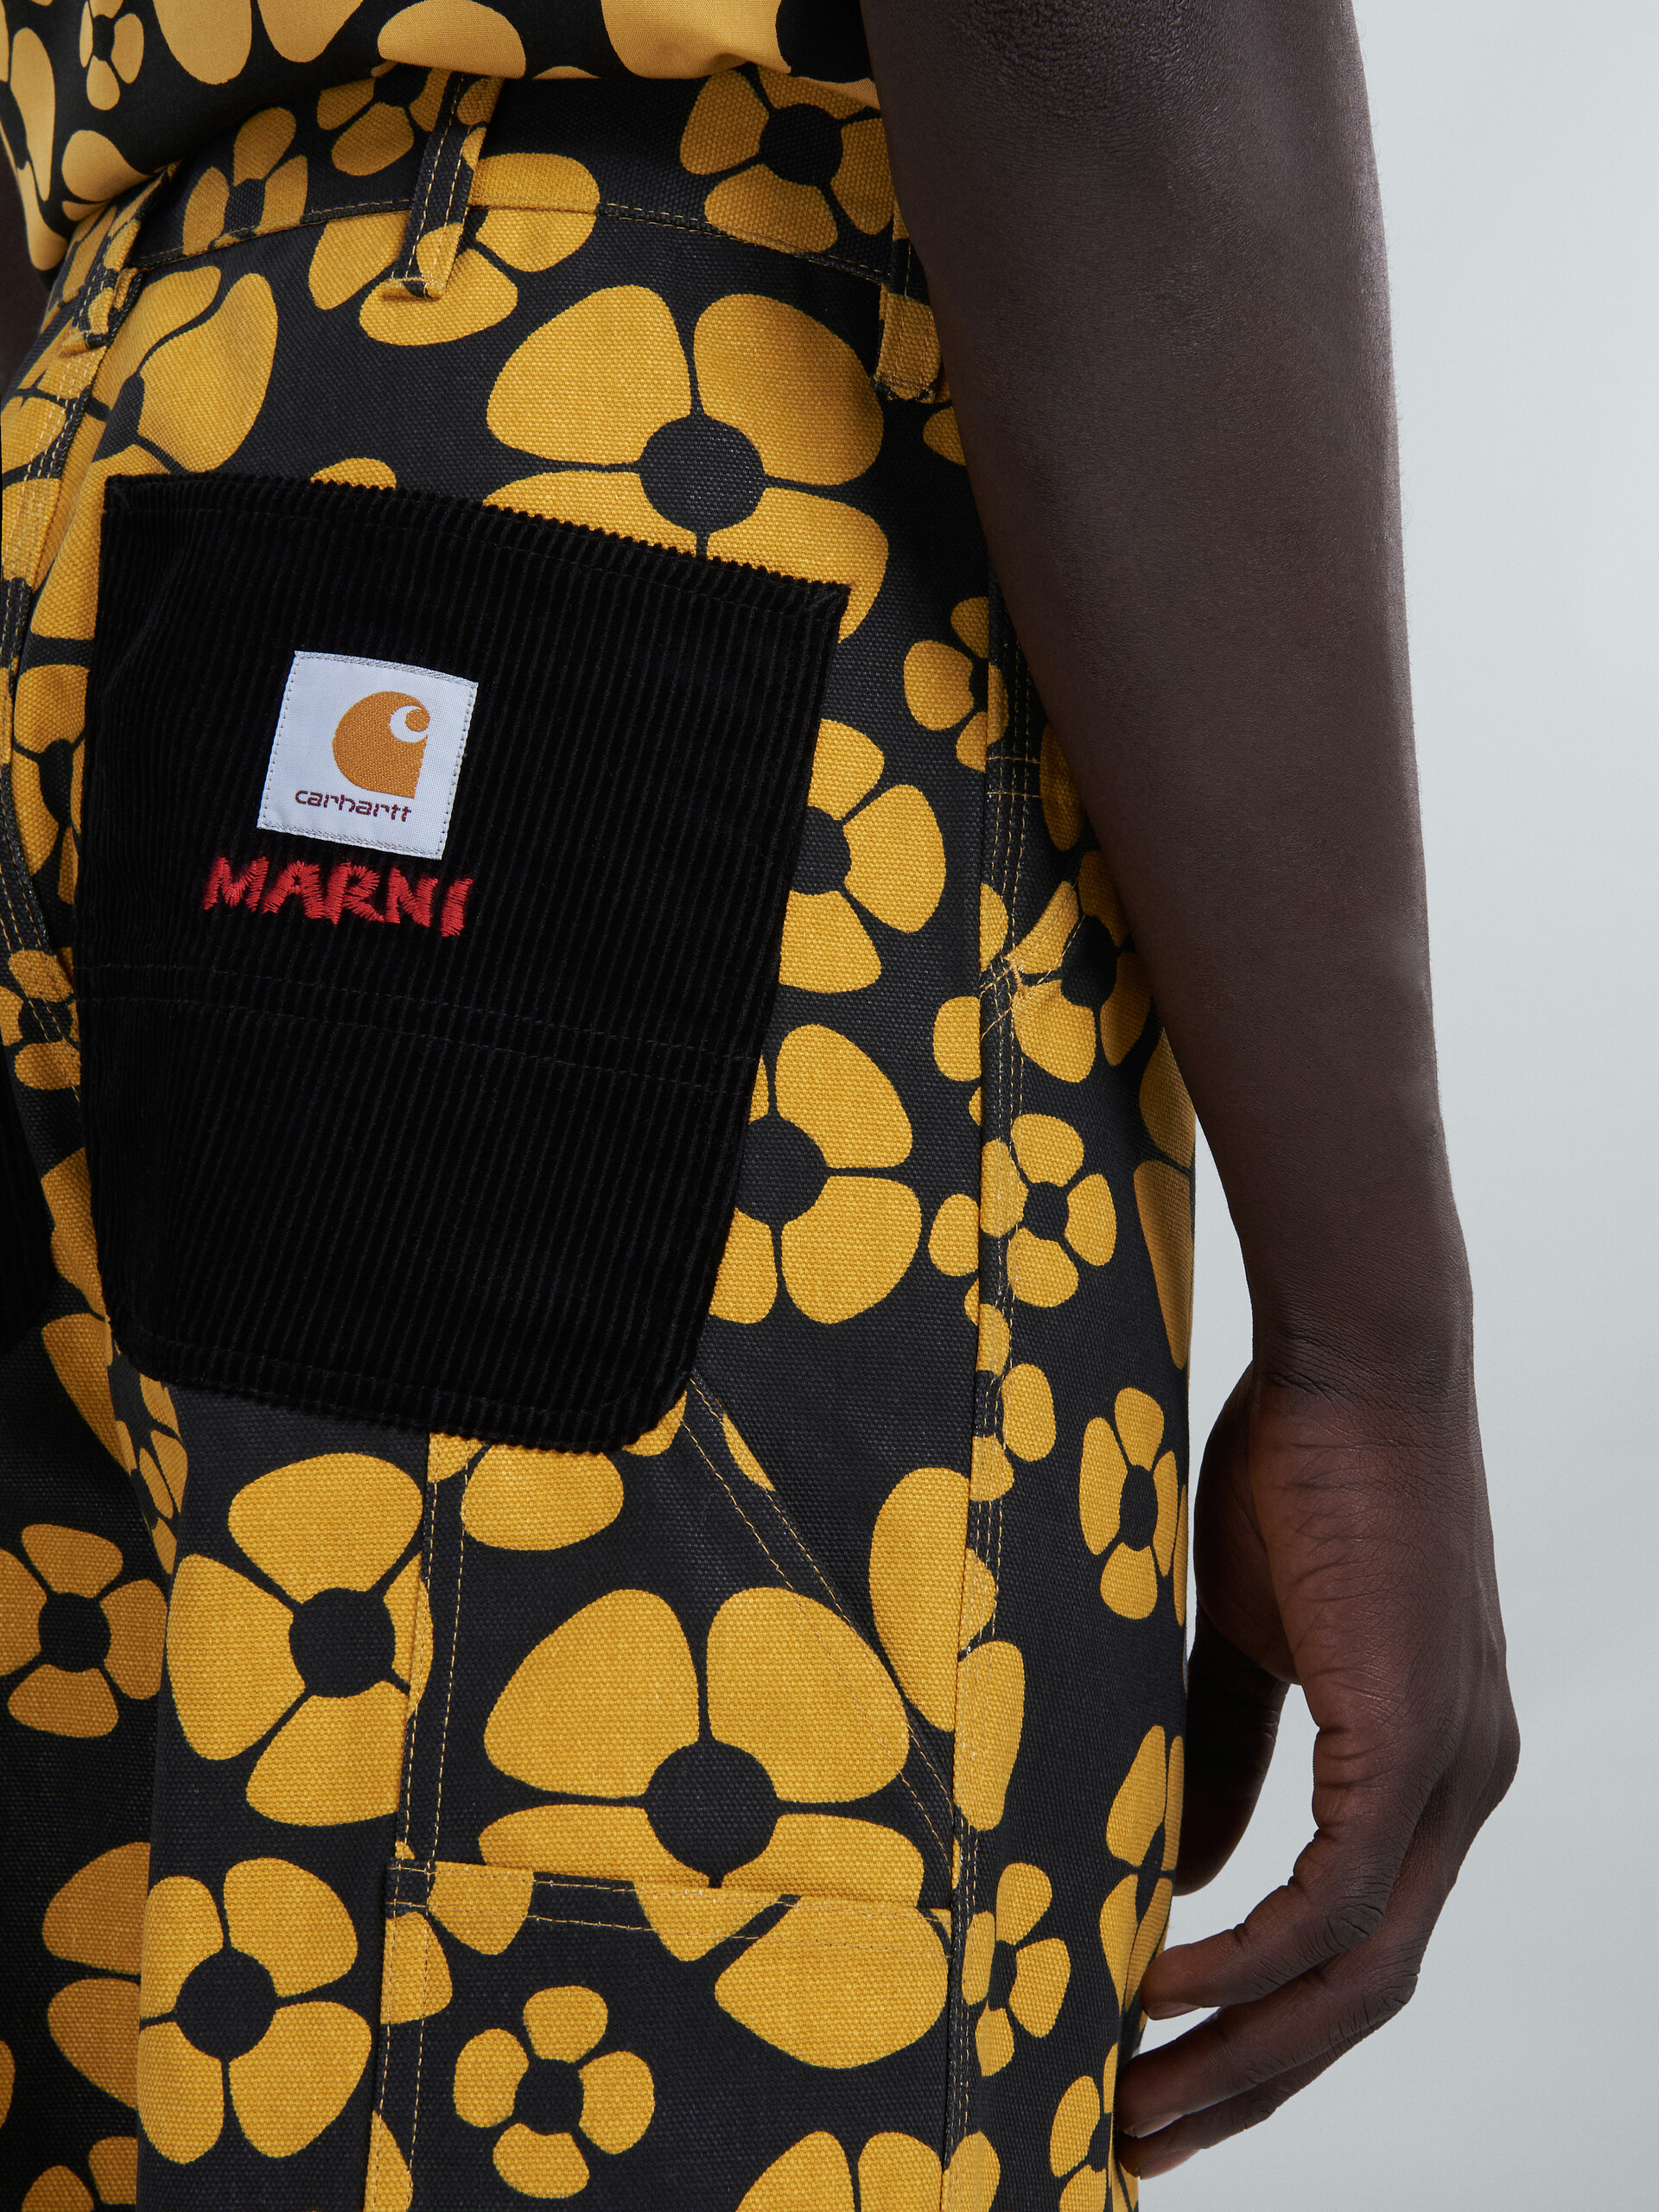 MARNI x CARHARTT WIP - yellow floral trousers - Pants - Image 4